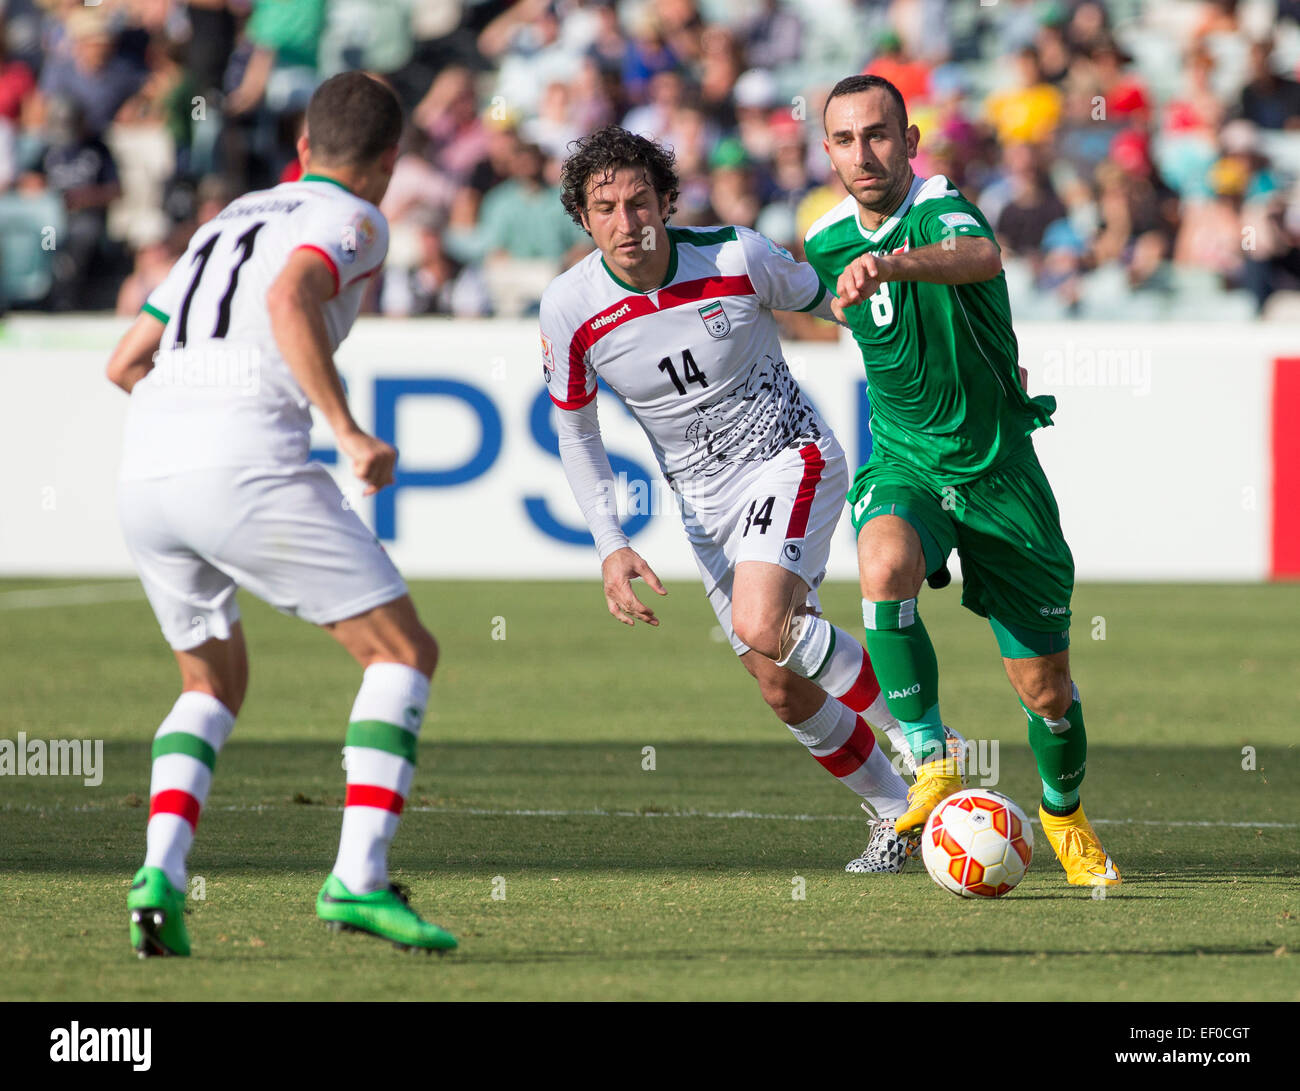 Canberra, Australia. 23rd Jan, 2015. Dhurgham Ismail (15) of Iraq works past Andranik Teymourian (14) of Iran in the FIFA Asian Football Confederation 2015 Asian Cup quarter-final game played in Canberra Stadium, Canberra, Australia © Action Plus Sports/Alamy Live News Stock Photo